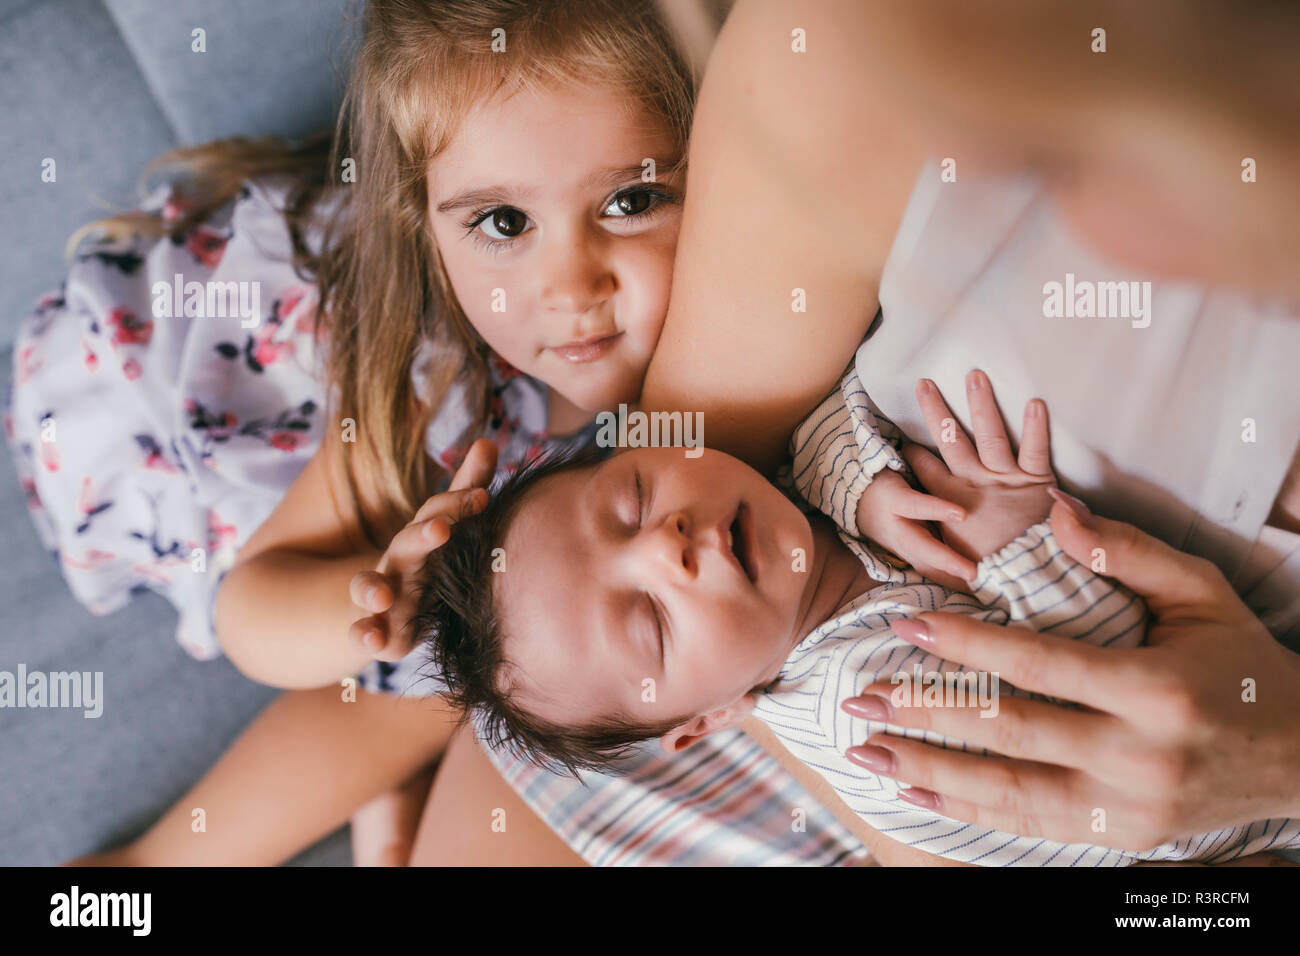 Mother holding her baby close with sister feeling his hair Stock Photo